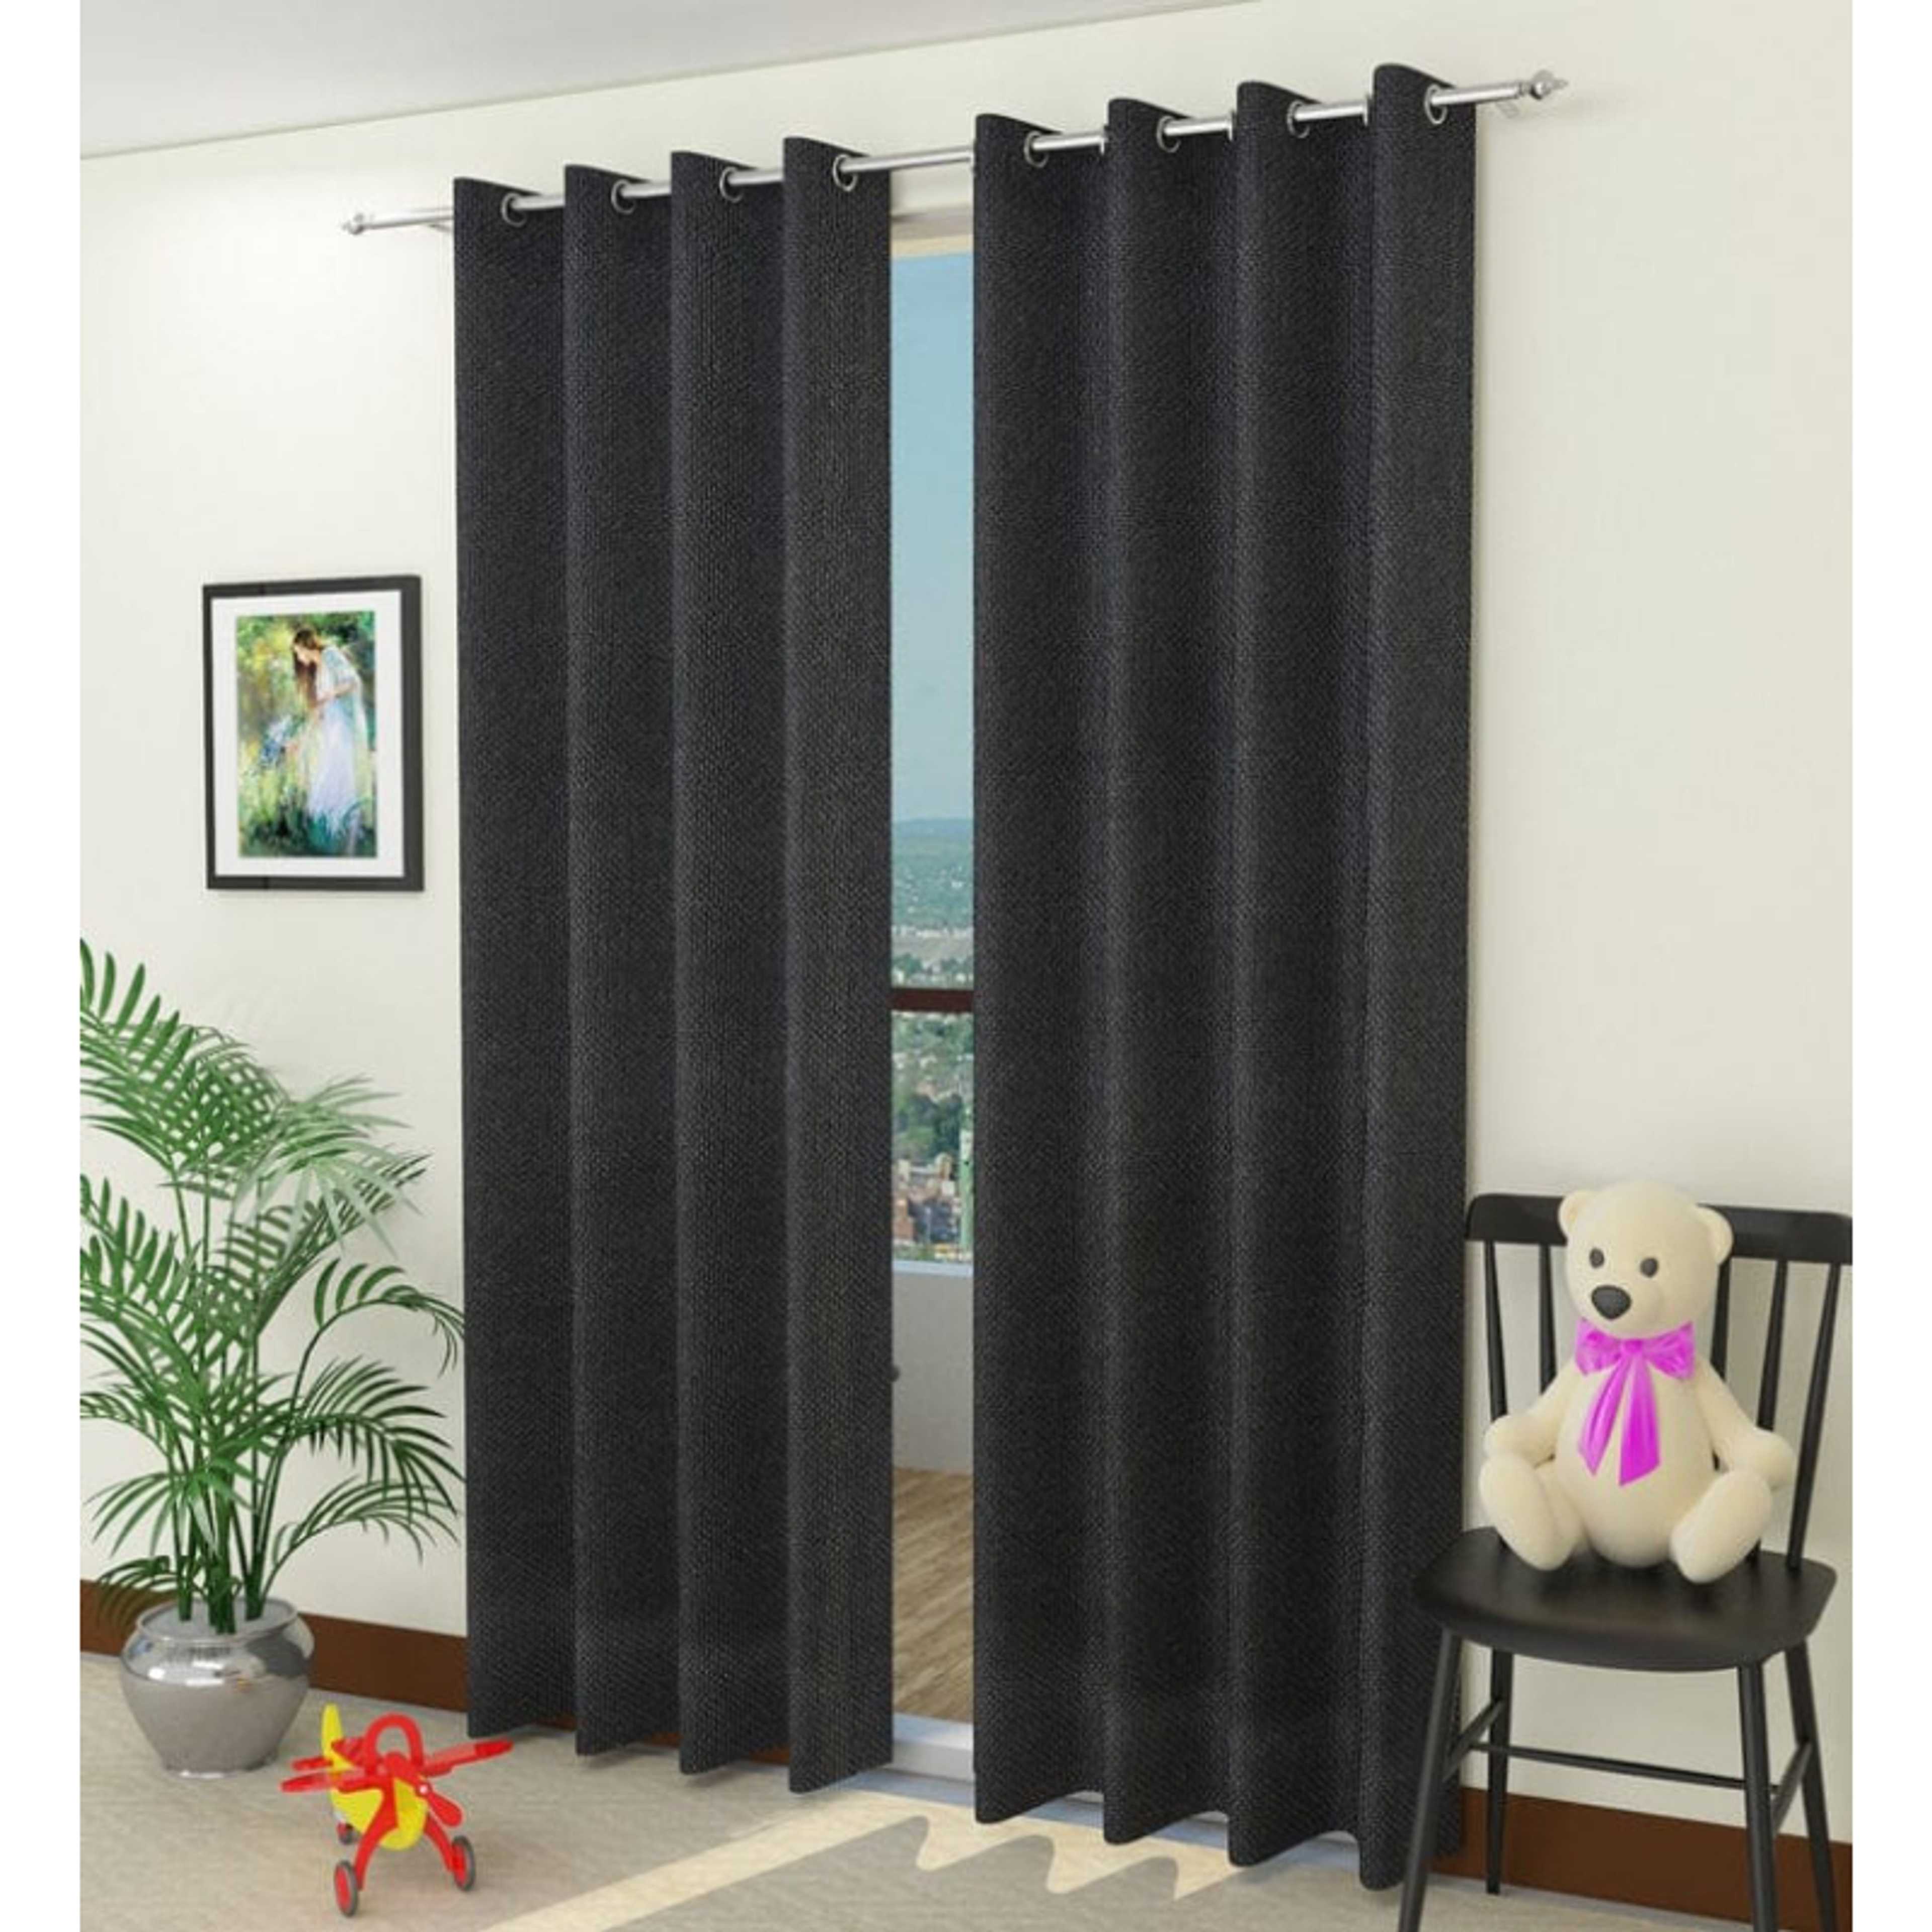 Pack of 2 Luxury Plain Jute Eyelet Curtains With linning - Black